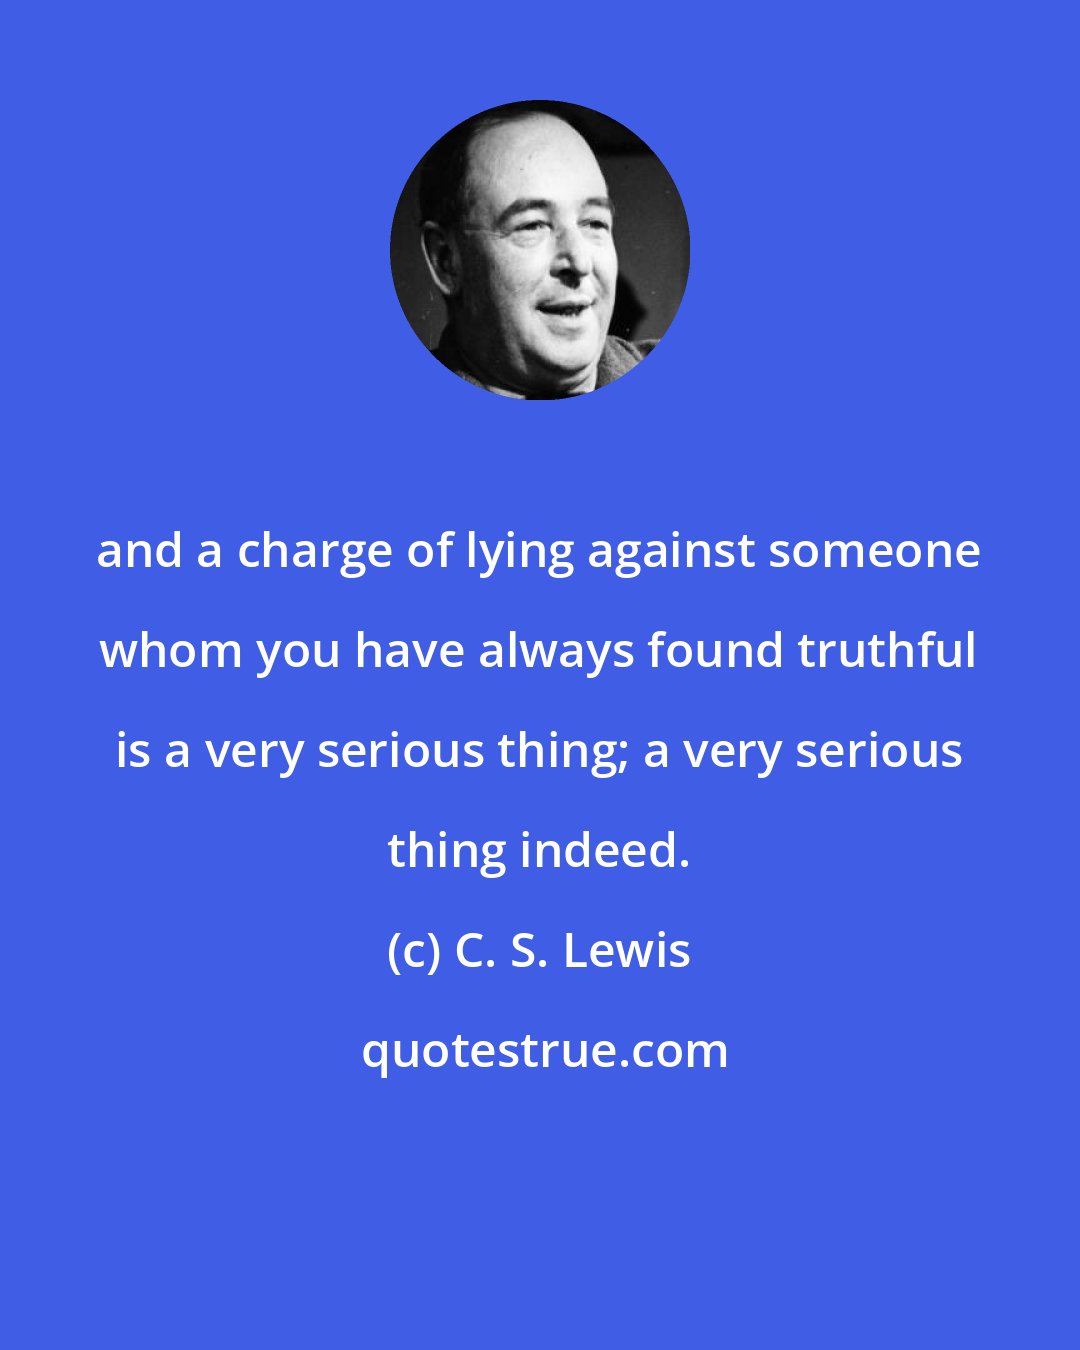 C. S. Lewis: and a charge of lying against someone whom you have always found truthful is a very serious thing; a very serious thing indeed.